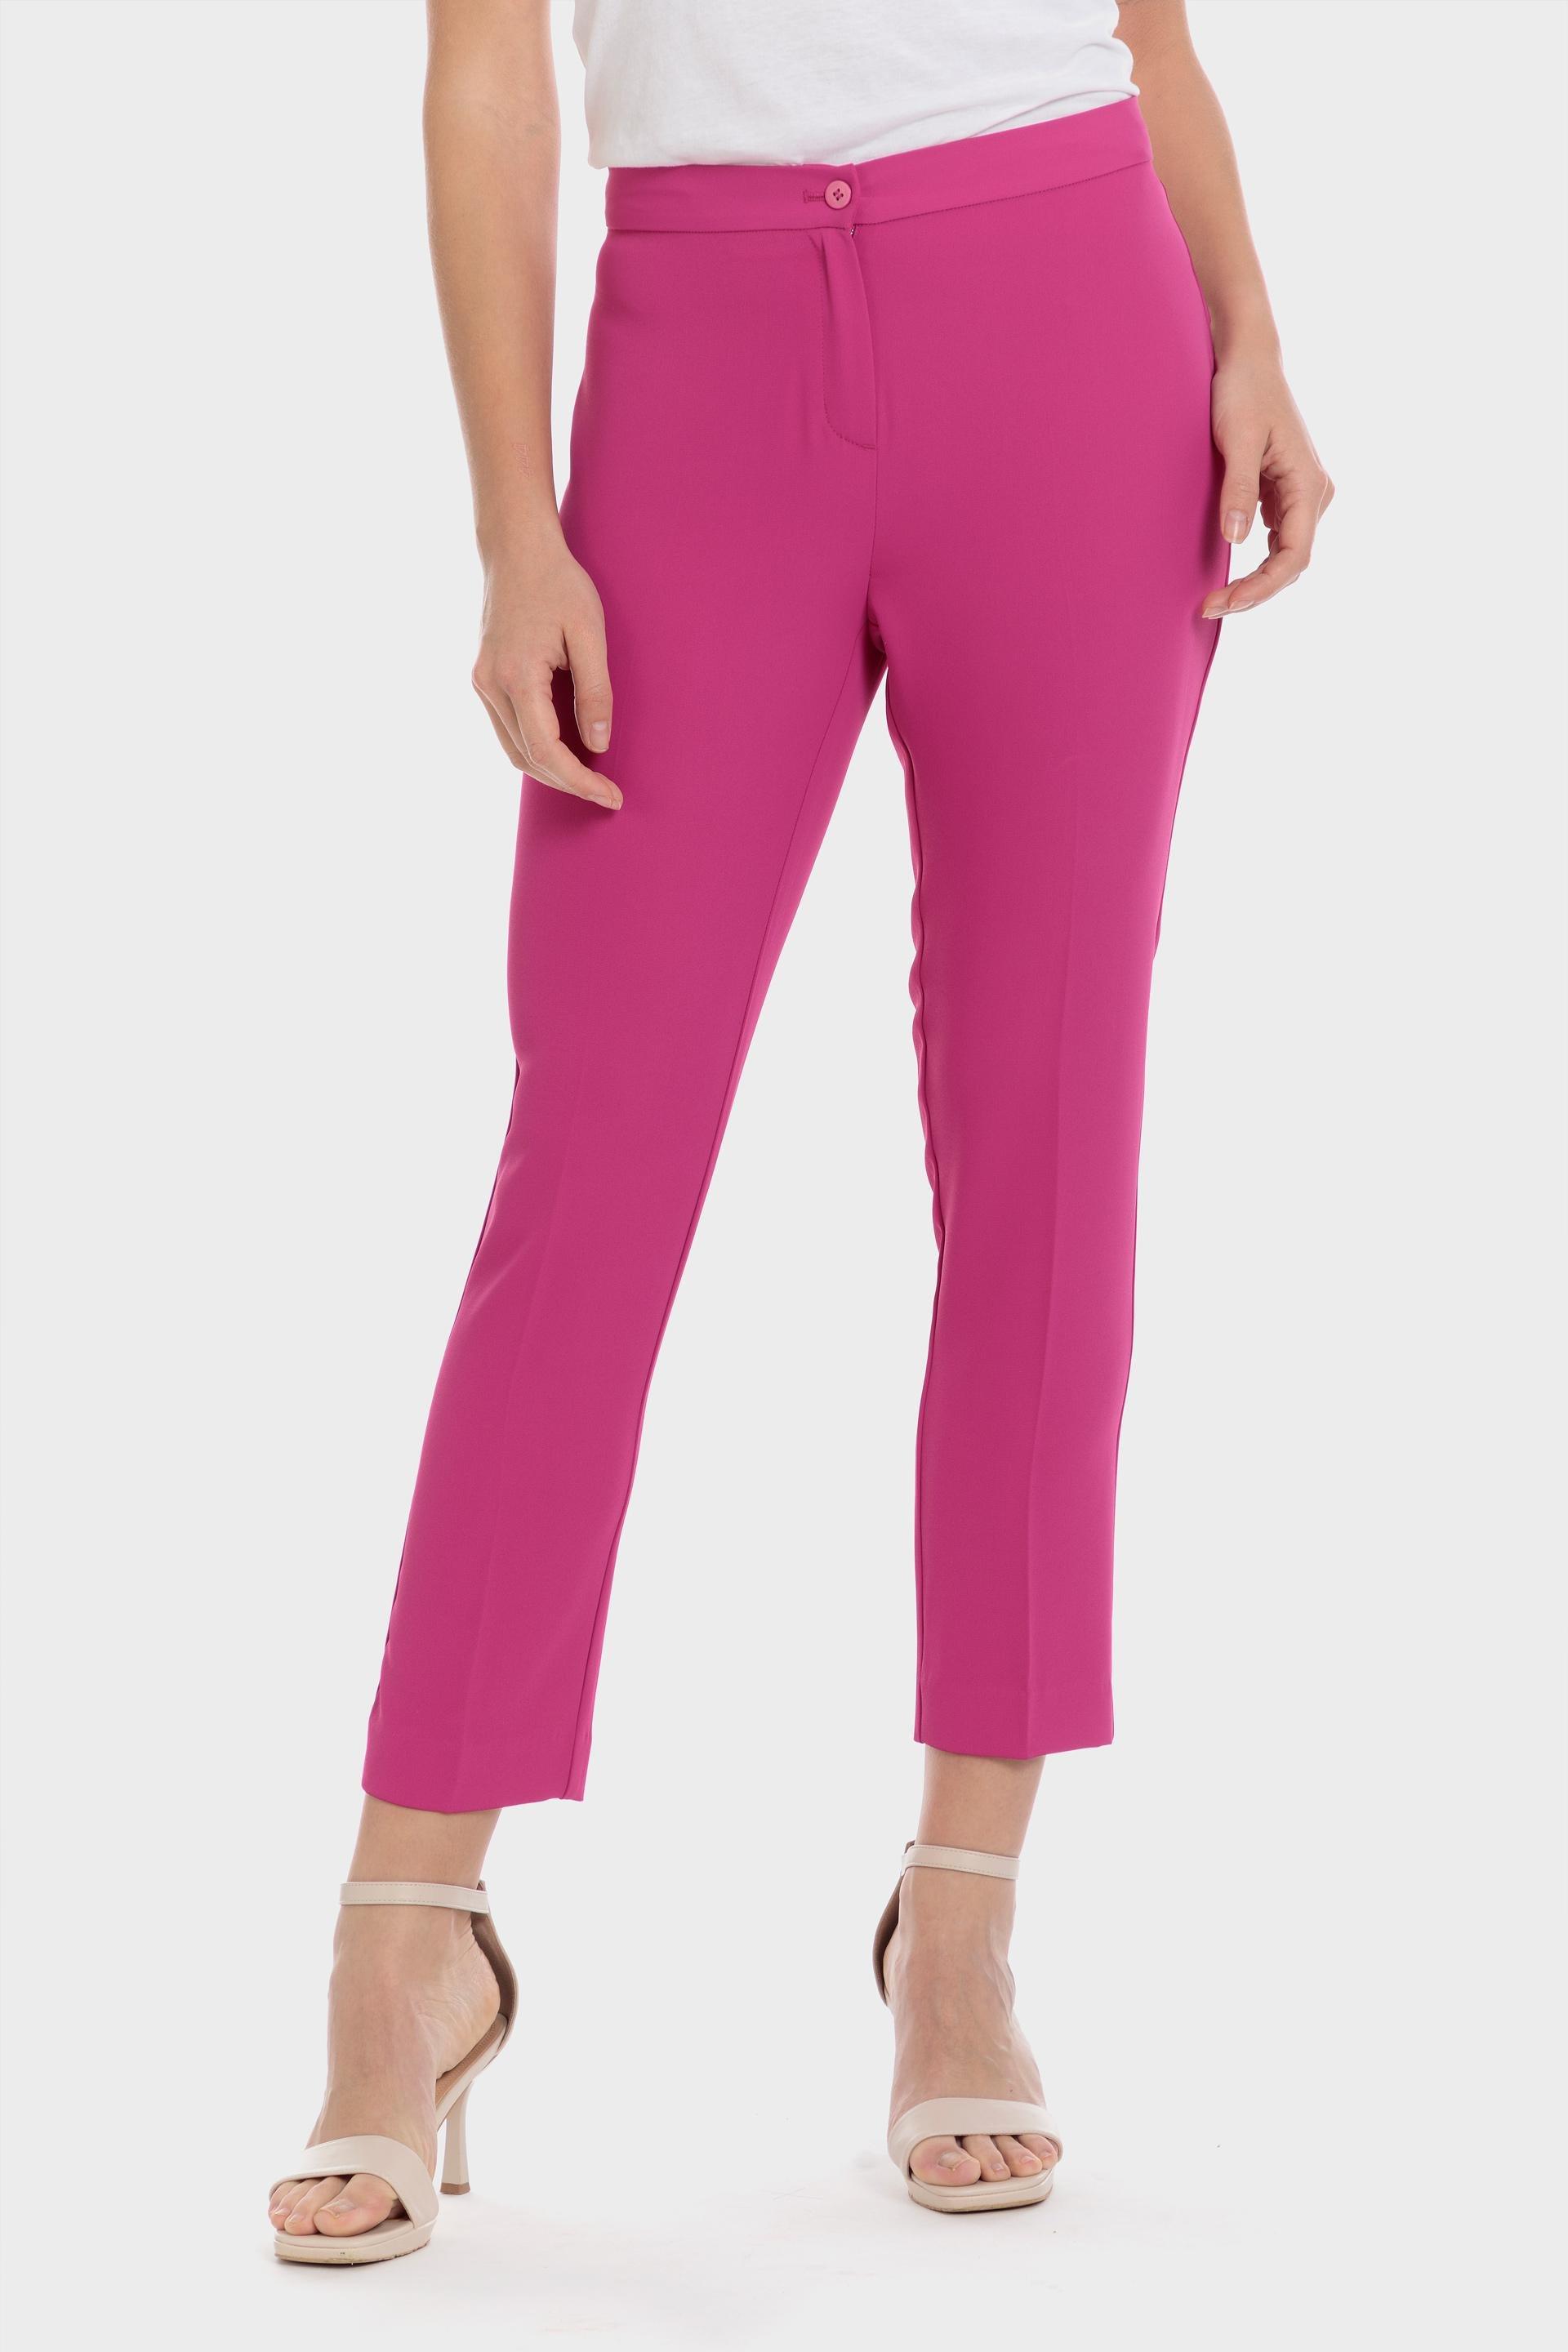 Punt Roma - Pink Skinney Trousers